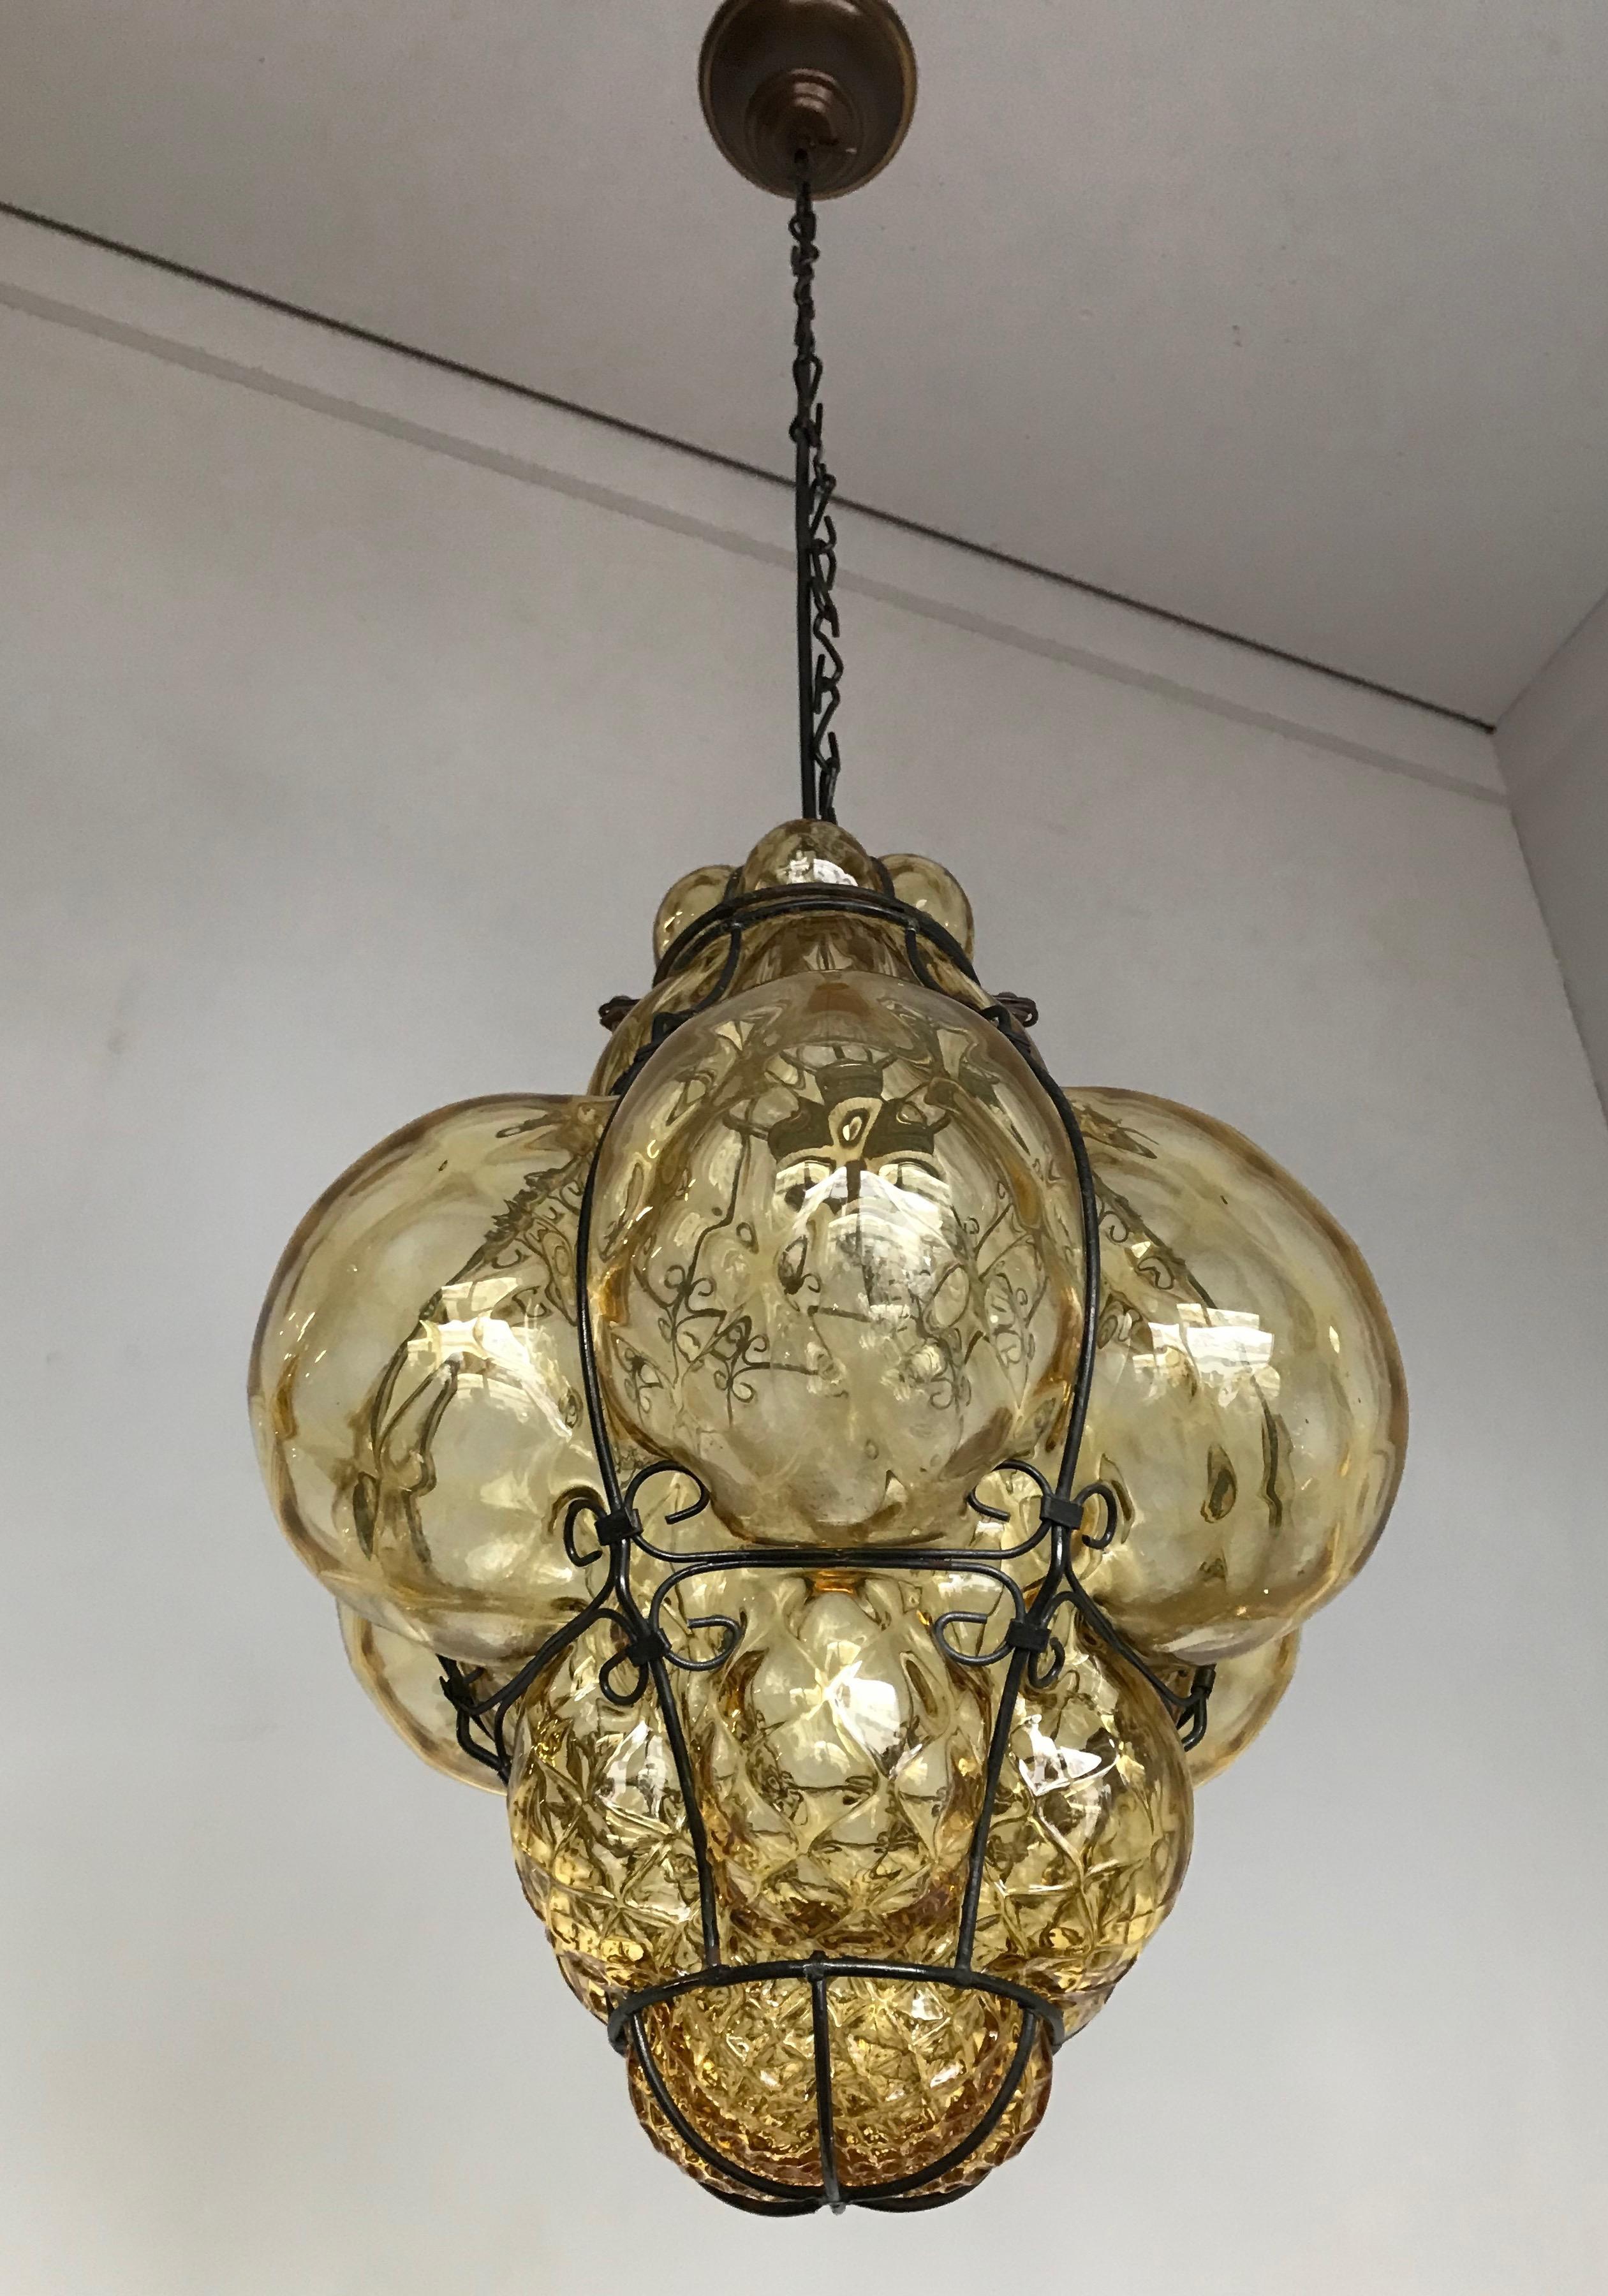 Early 20th century, Italian craftsmanship pendant. 

This stylish single light pendant is beautiful in shape and the mouth blown, bronze tinted glass is in excellent condition. It comes with a chain and canopy which guarantees easy height